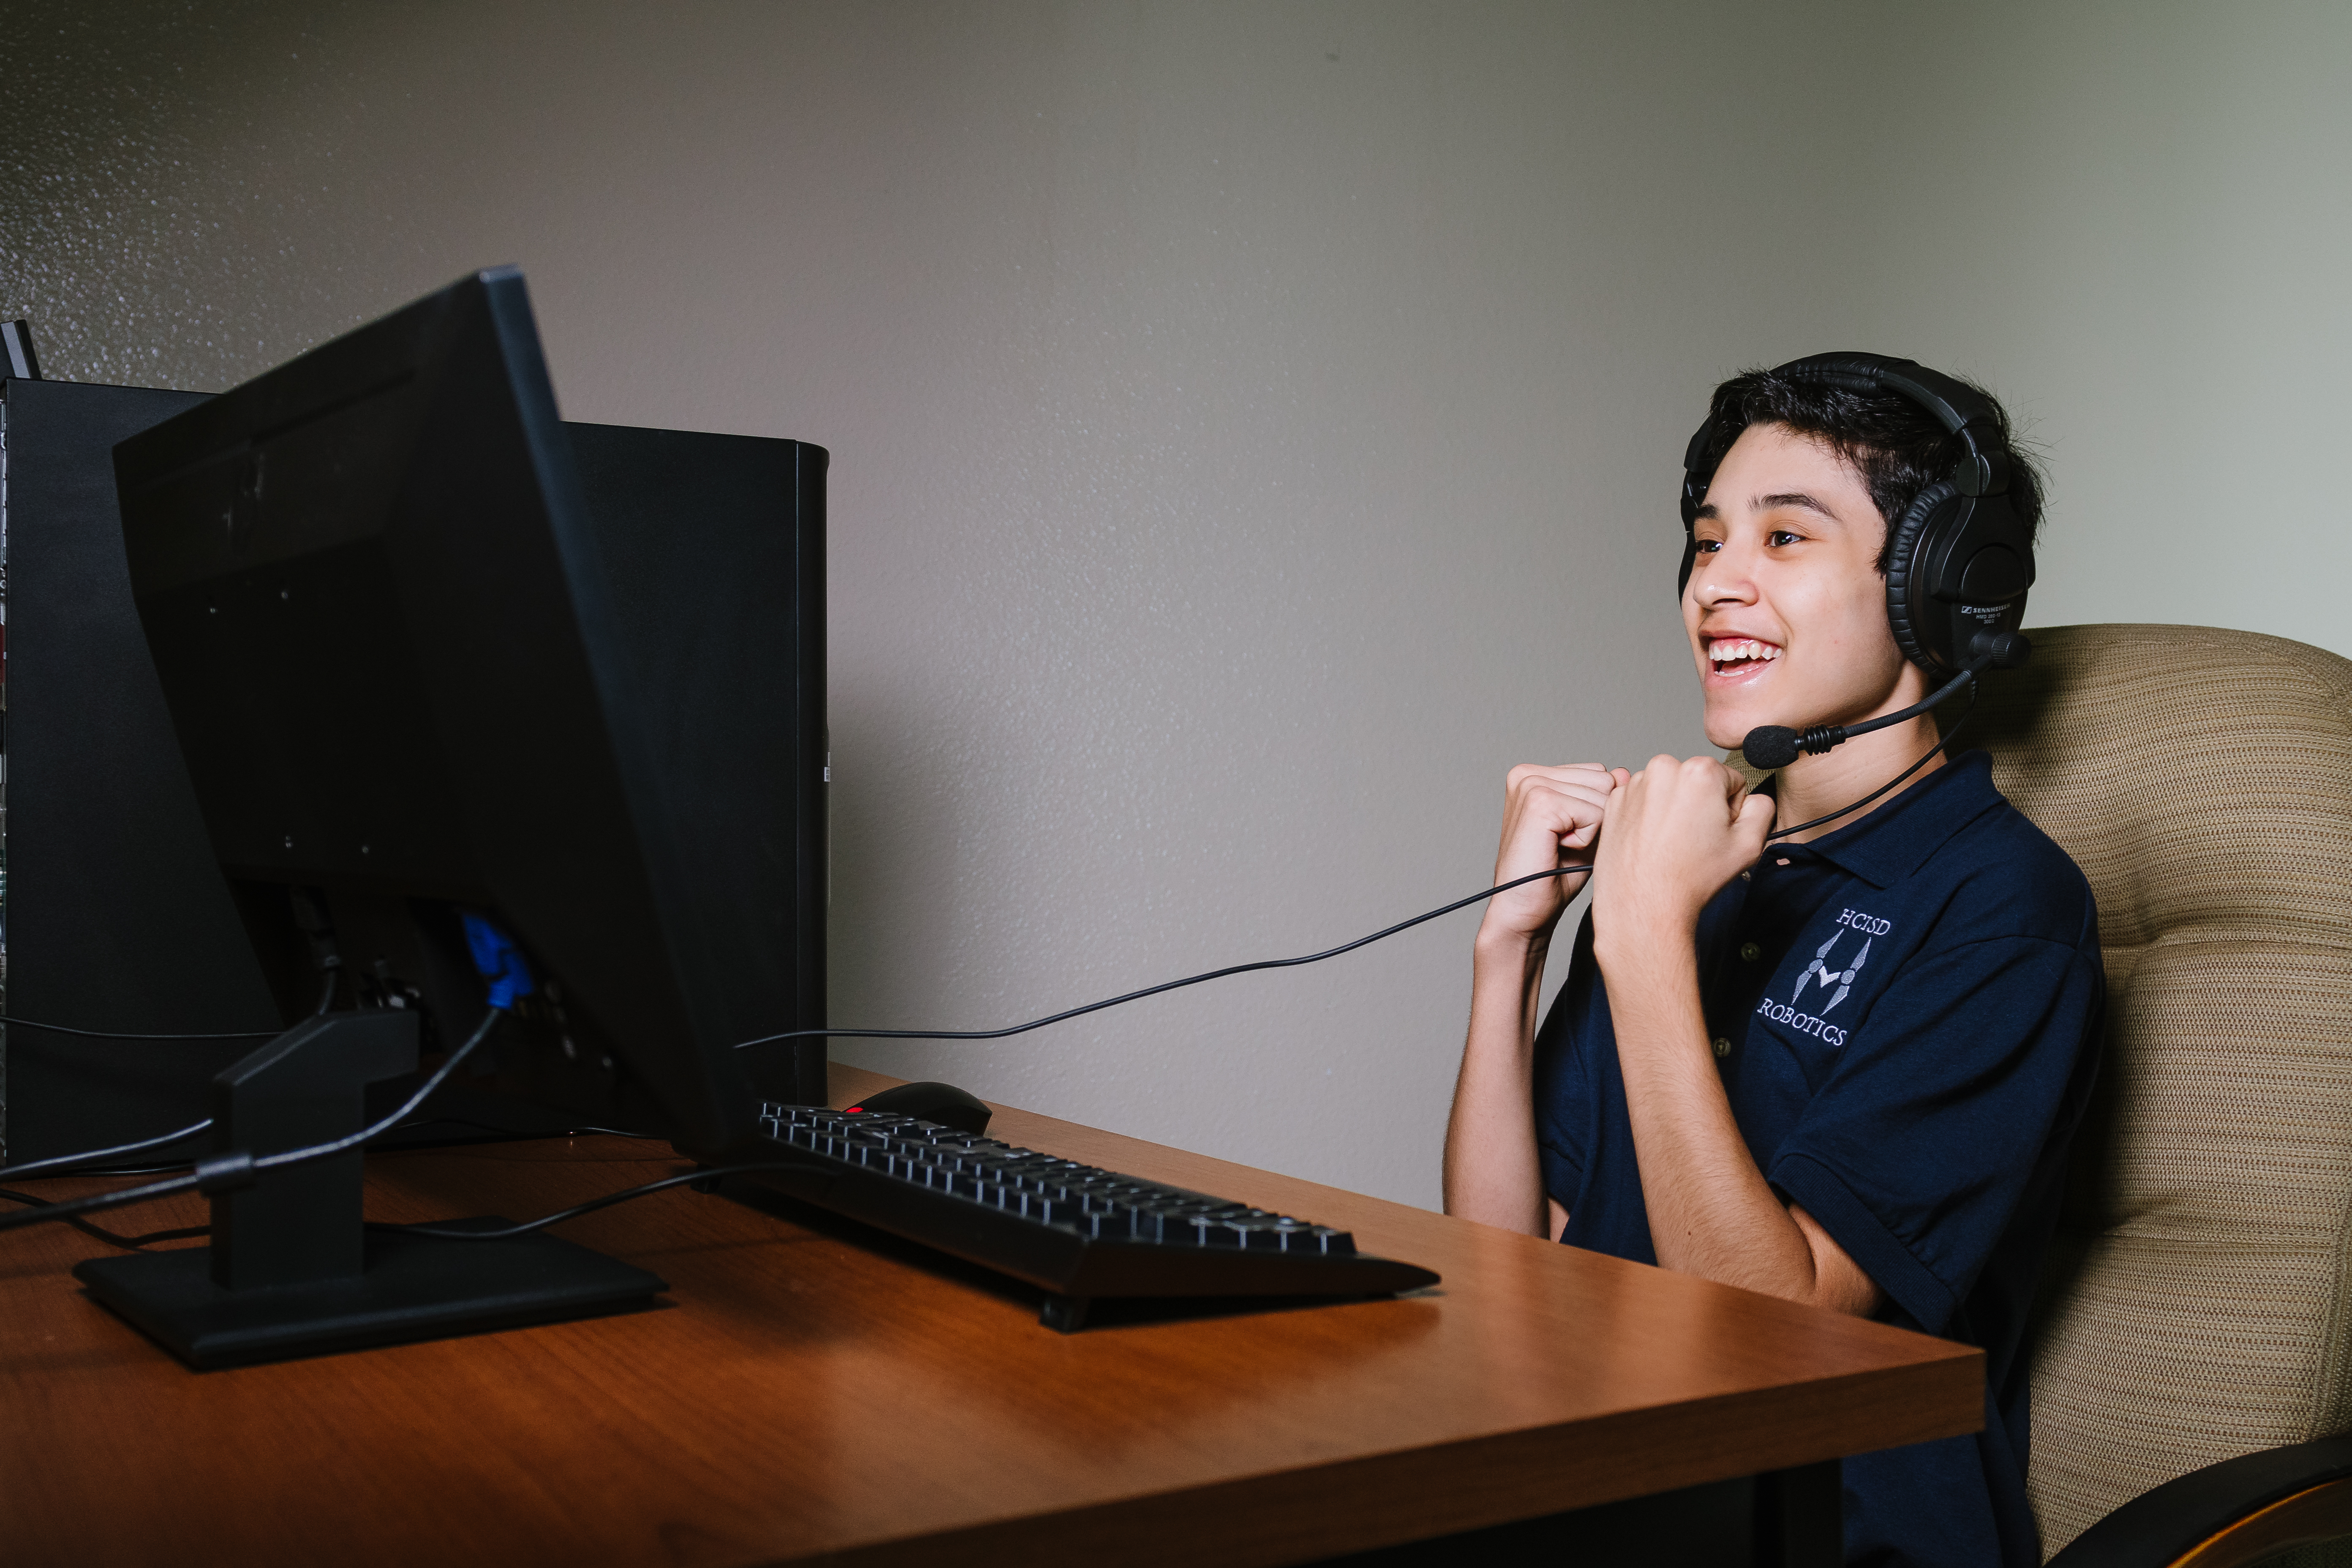 The excitement of esports arrives to HCISD